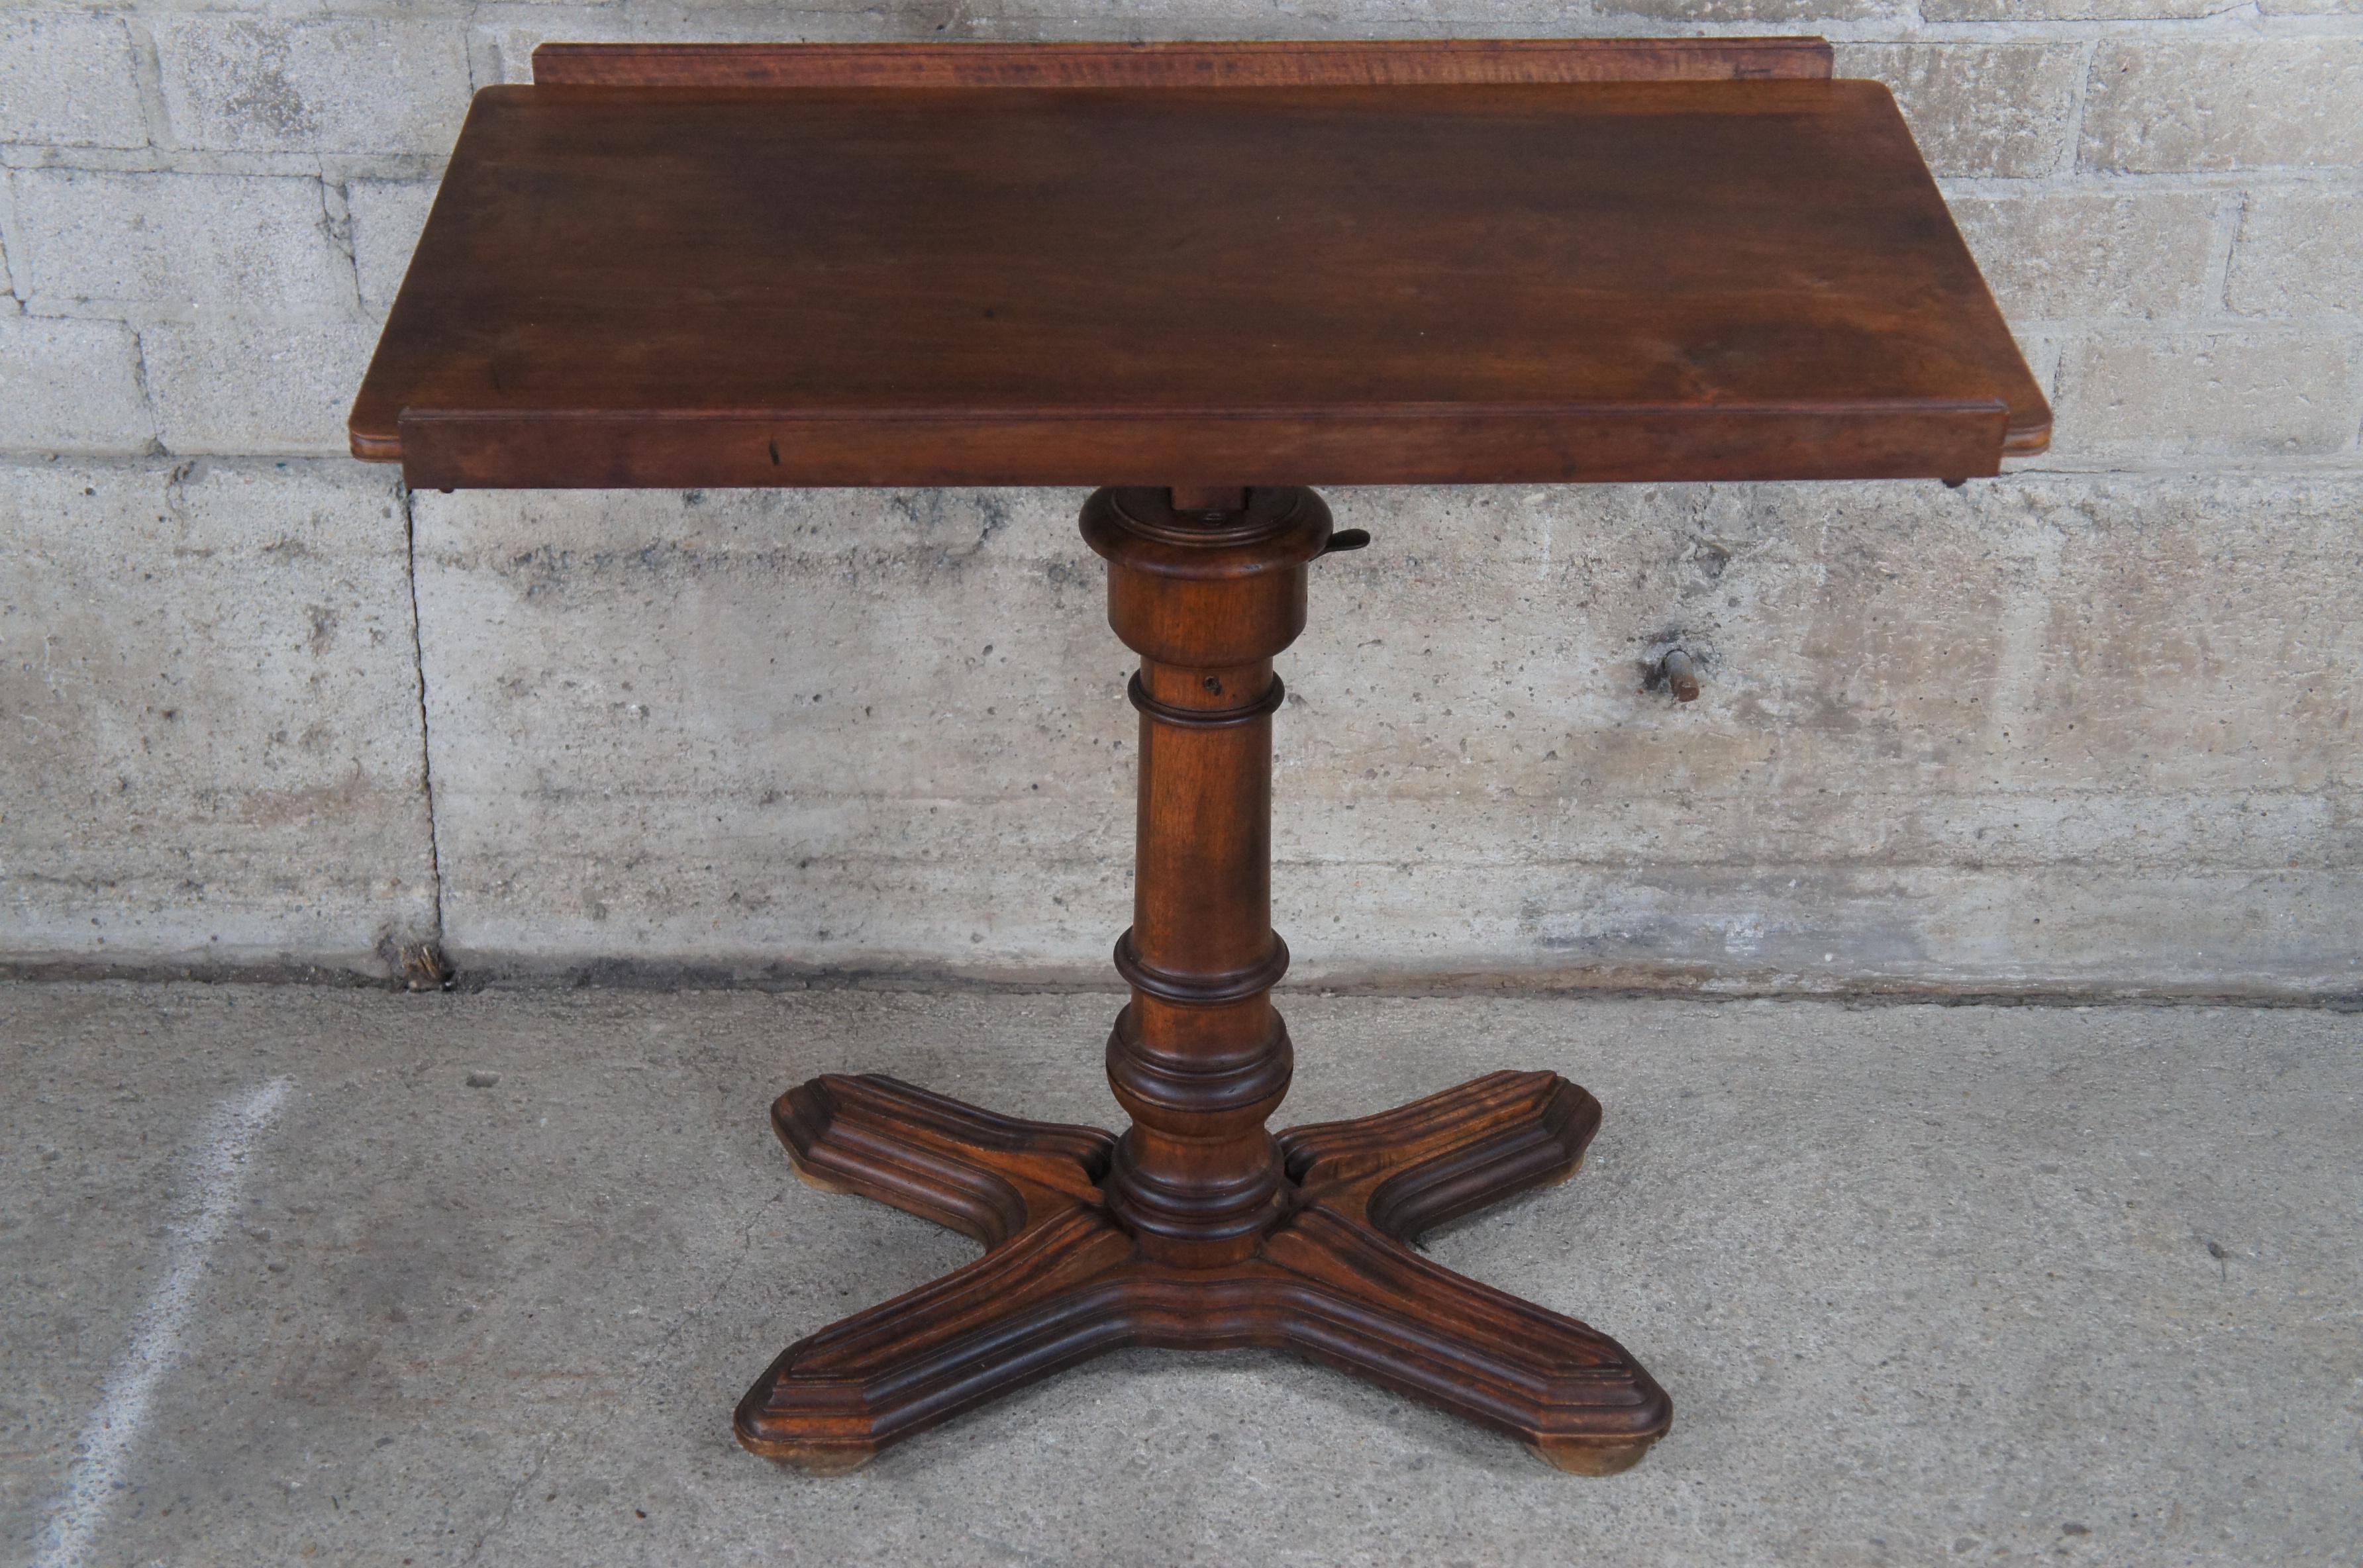 Antique 19thC Emile Chouanard French Walnut Lectern Drafting Table Easel In Good Condition For Sale In Dayton, OH